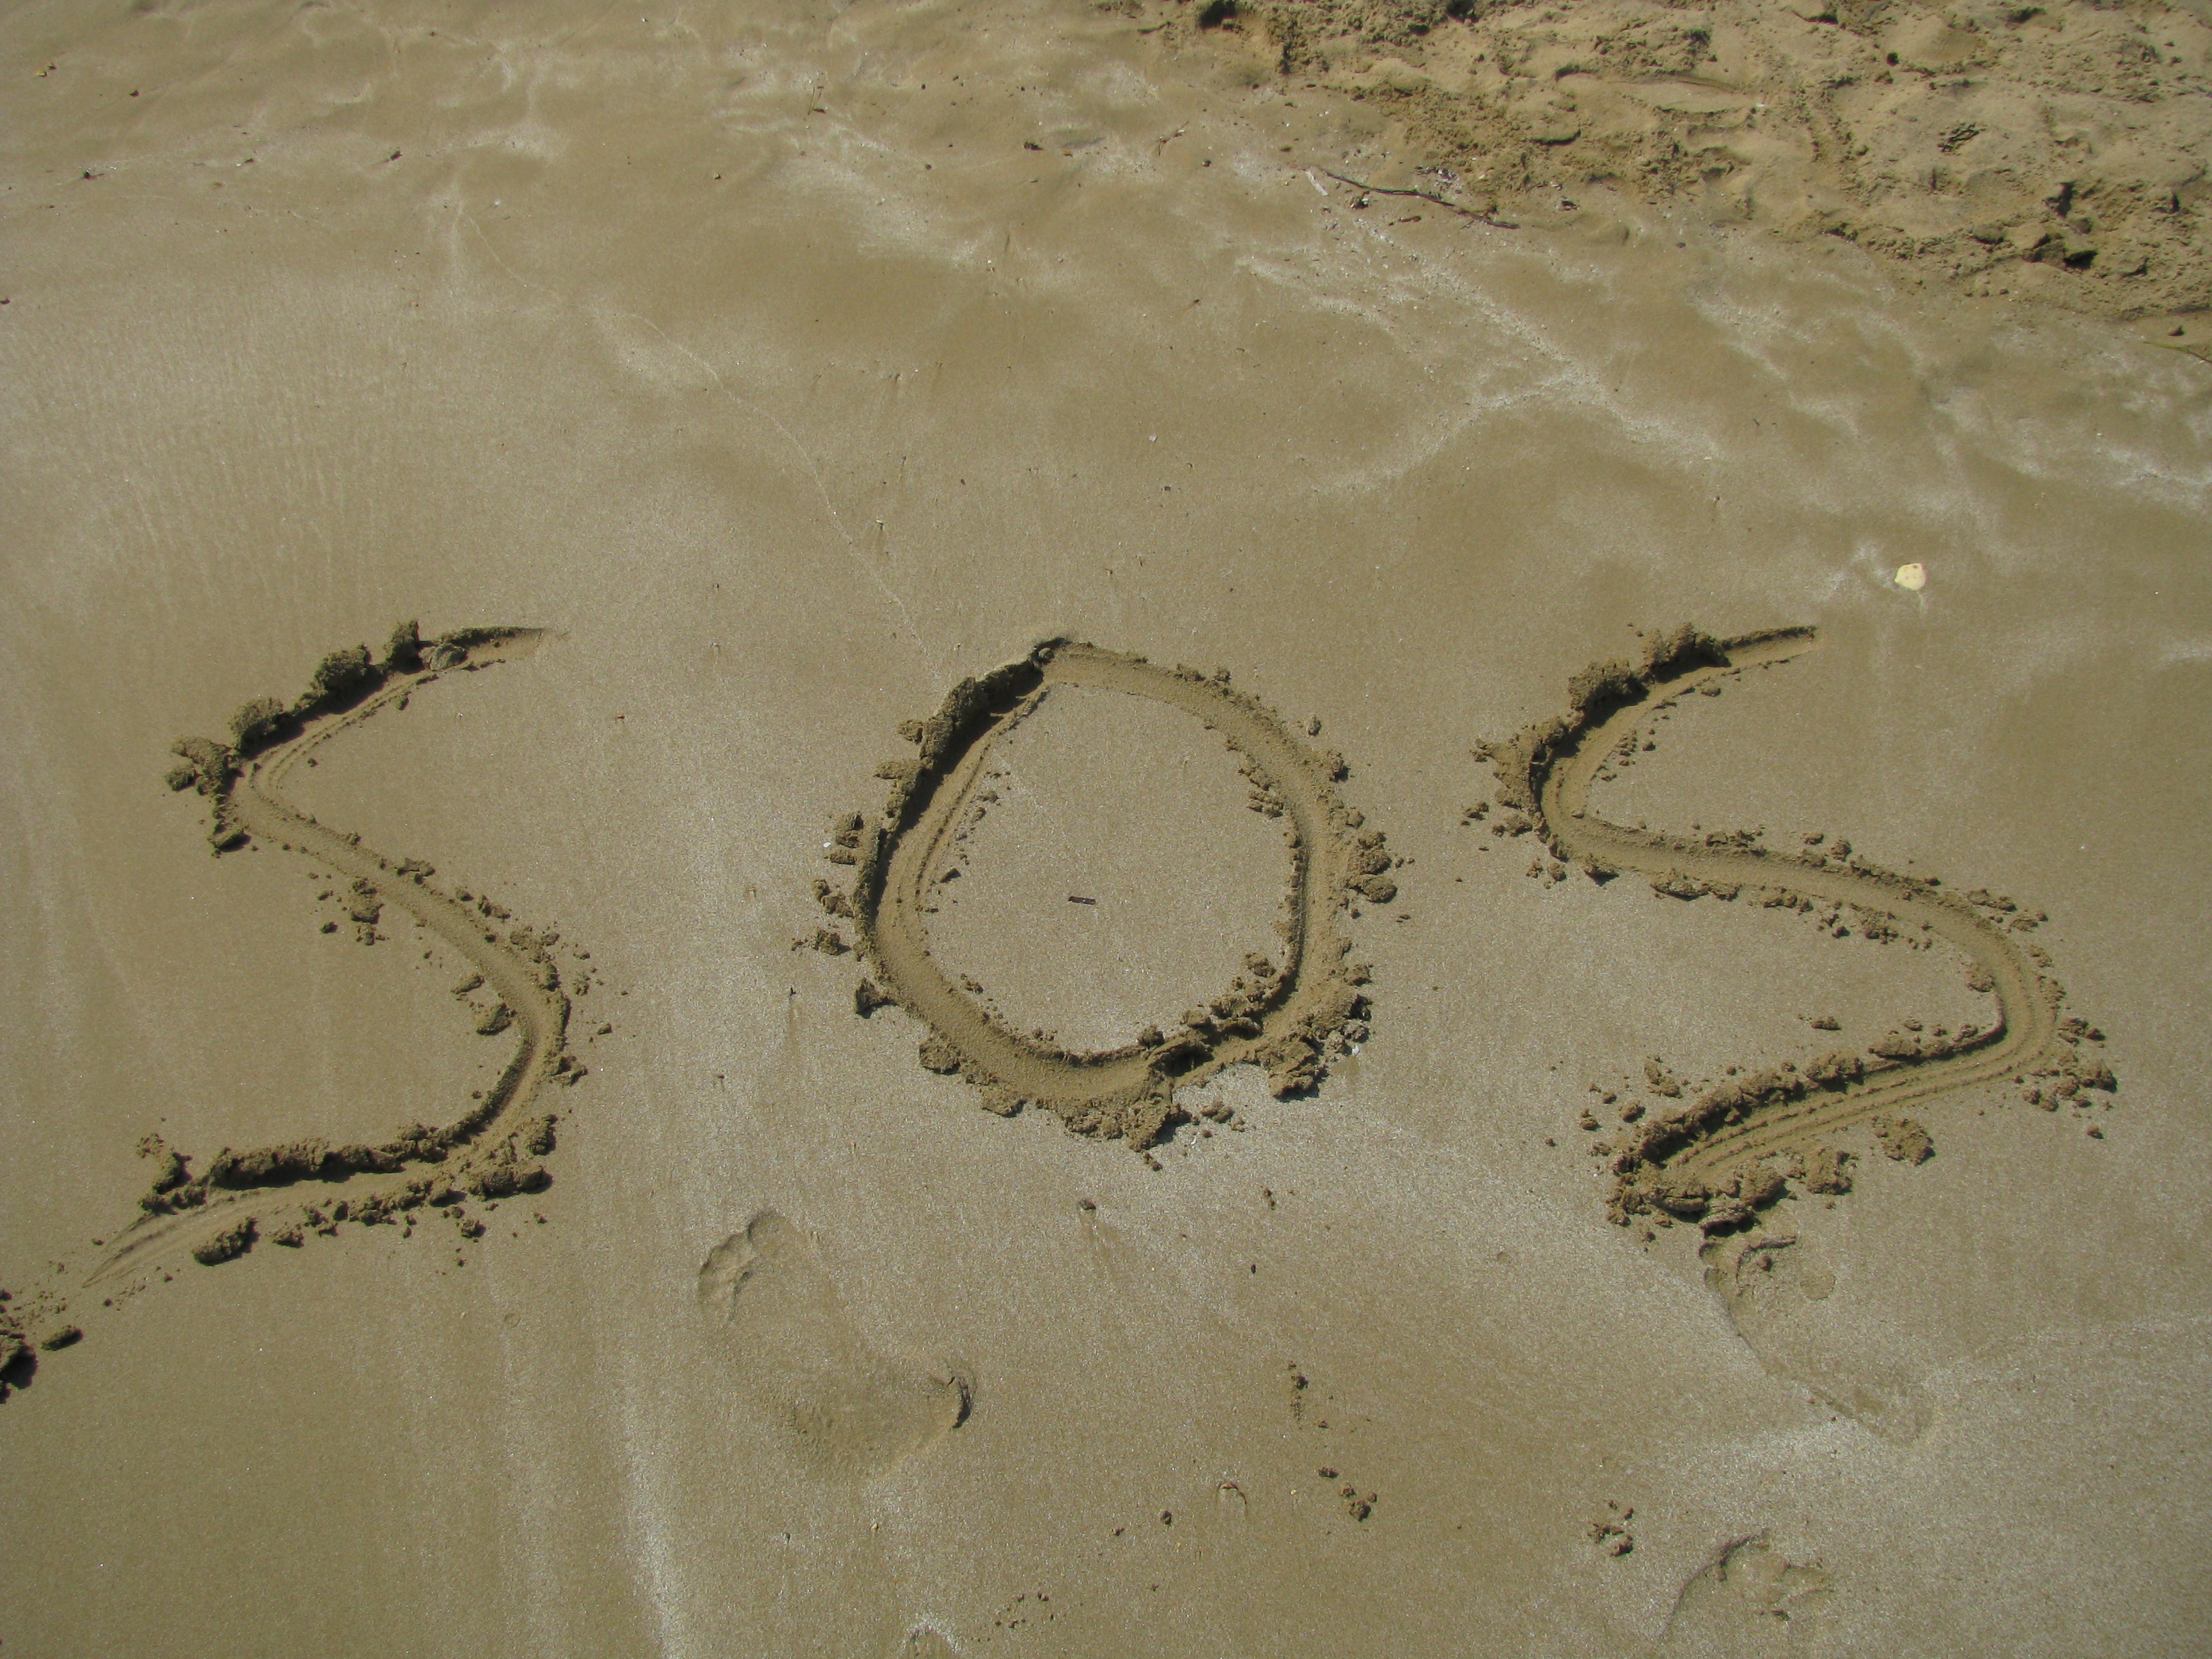 The word 'sos' is written on the sand on the beach.